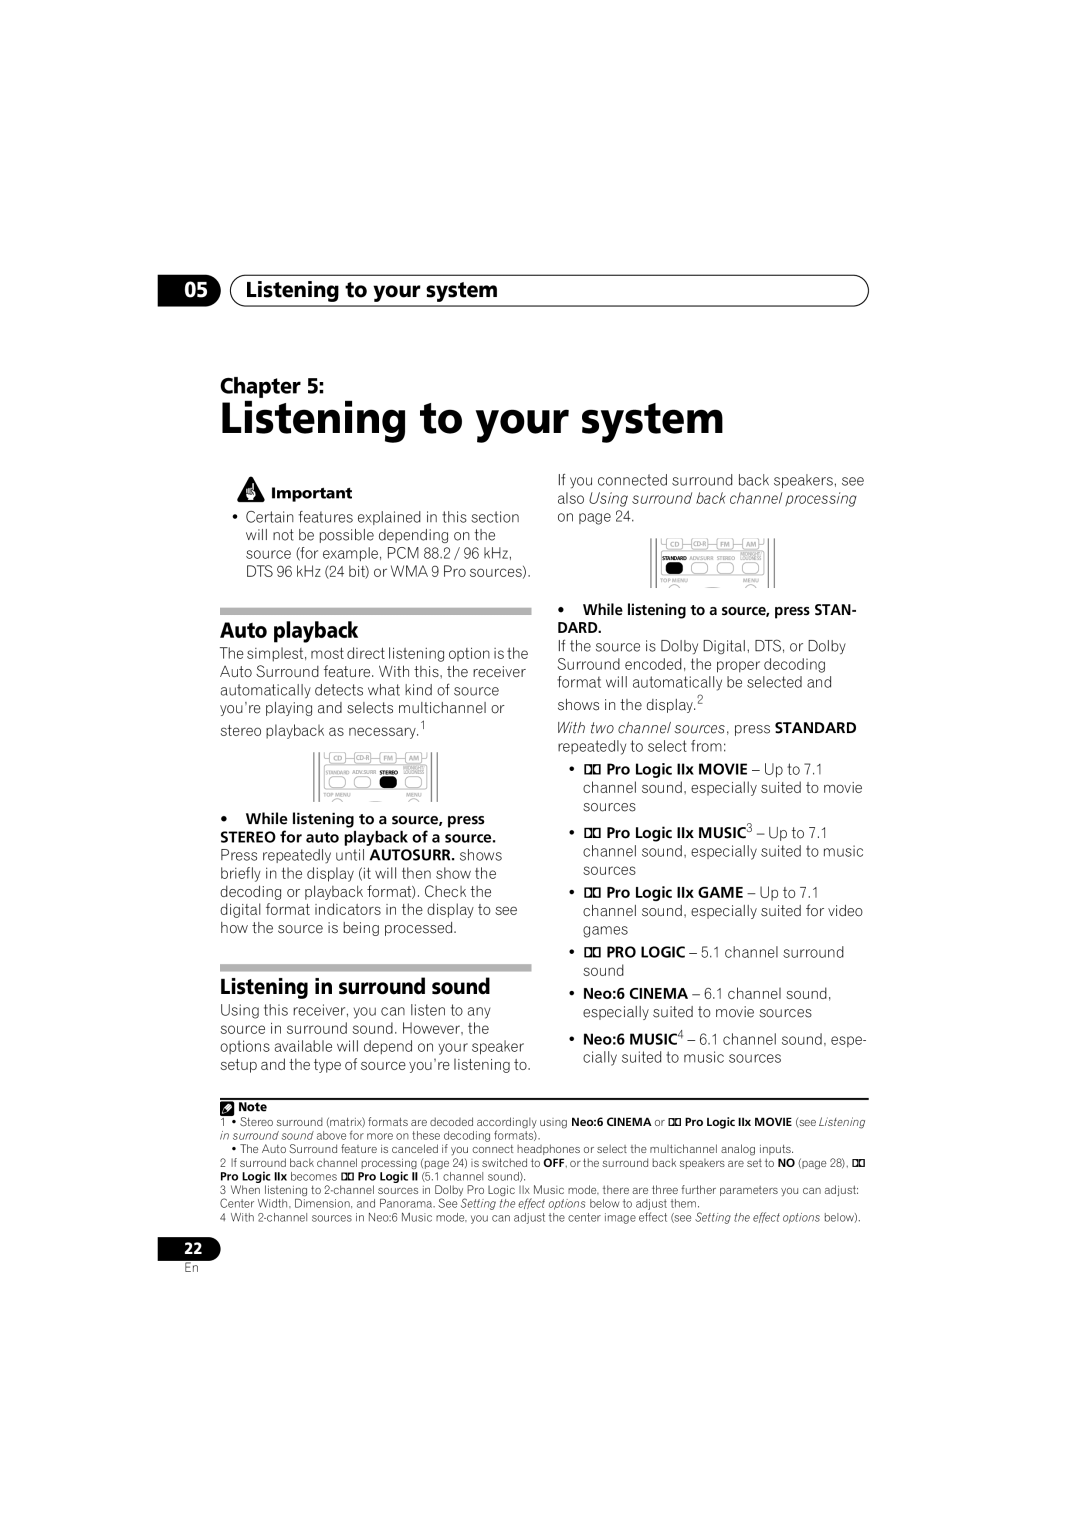 Pioneer VSX-516 operating instructions 05Listening to your system Chapter, Auto playback, Listening in surround sound 